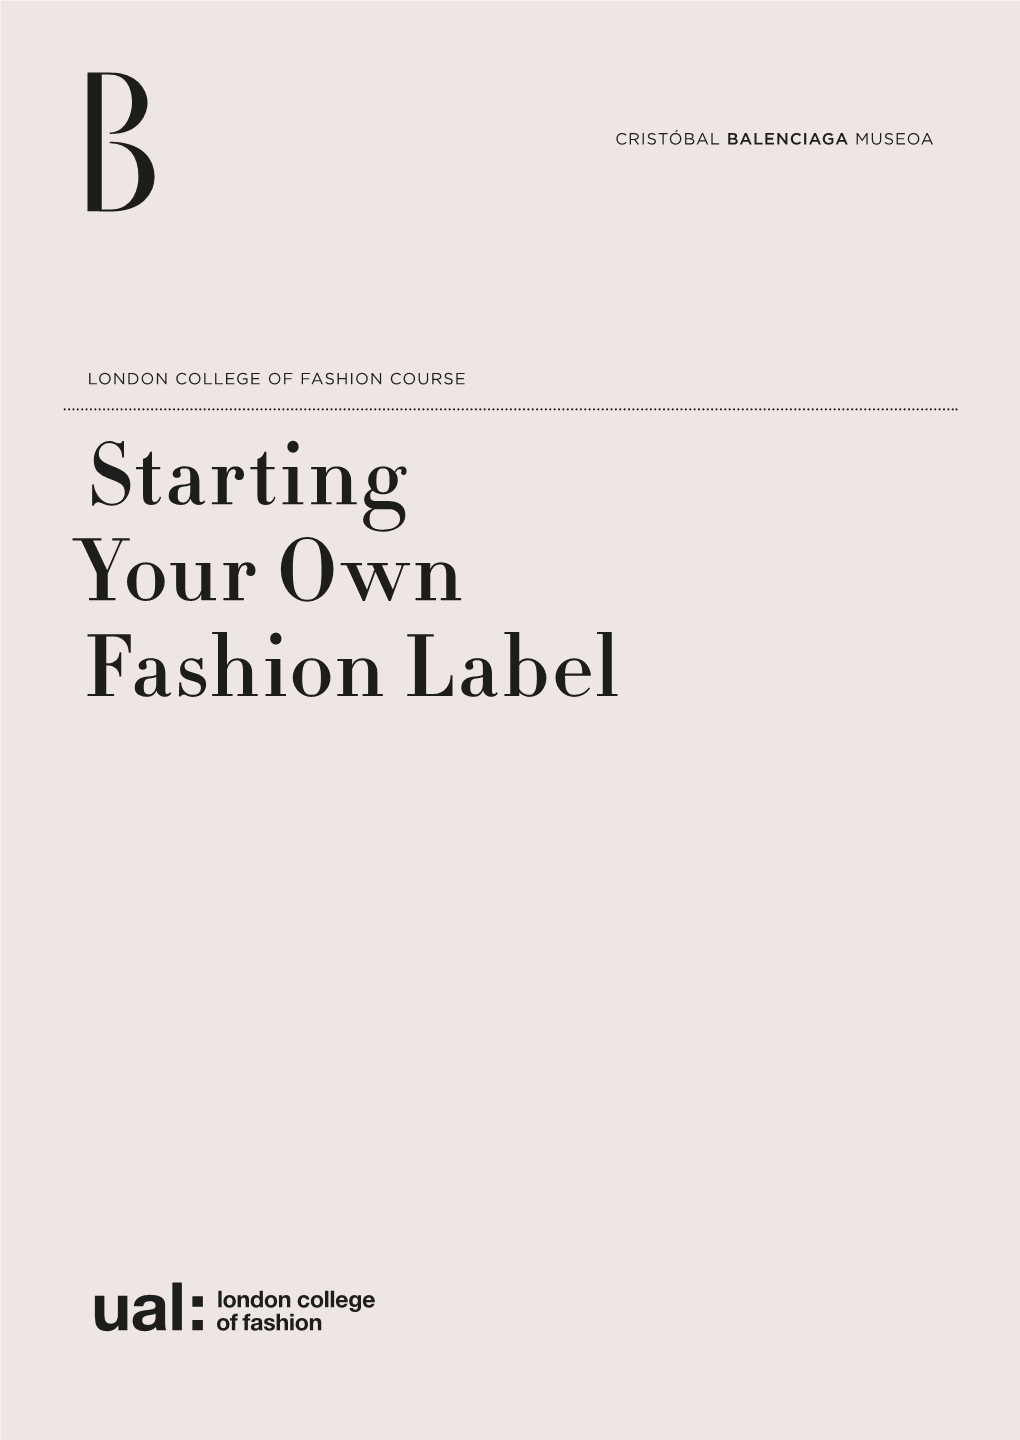 Starting Your Own Fashion Label PRESENTATION